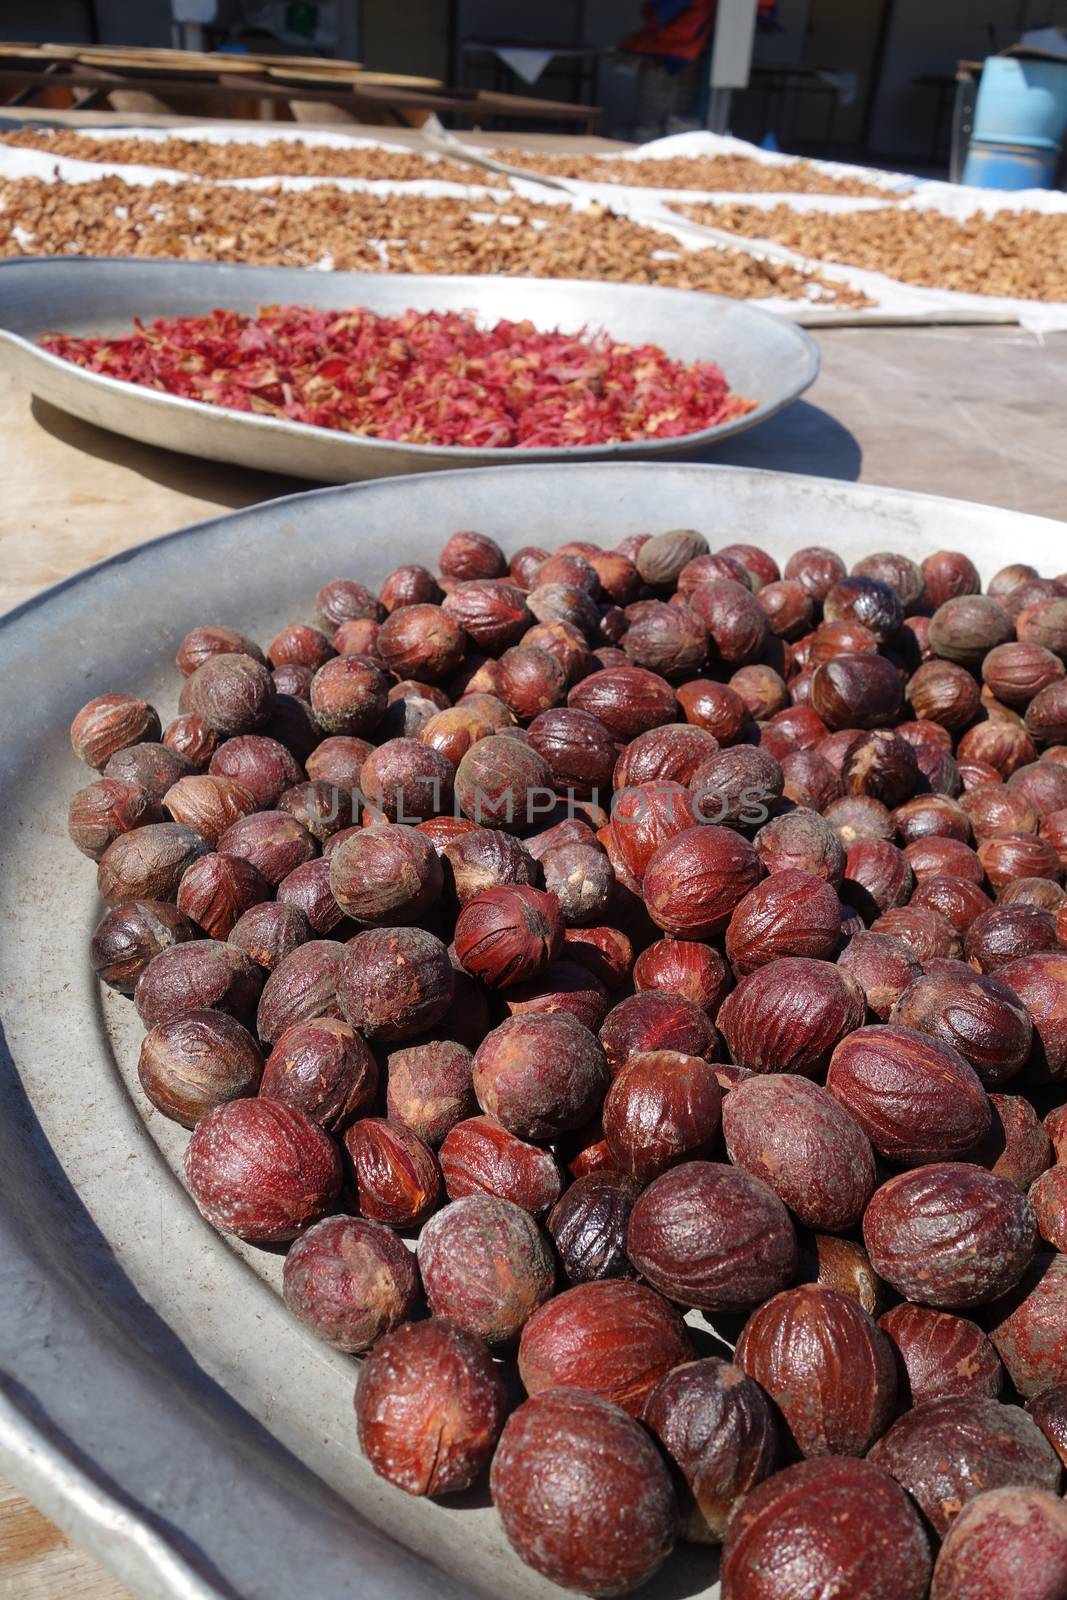 Dried nutmeg seeds. The hard brown seed from the nutmeg tree (a tropical evergreen) has a warm, spicy sweet flavor.